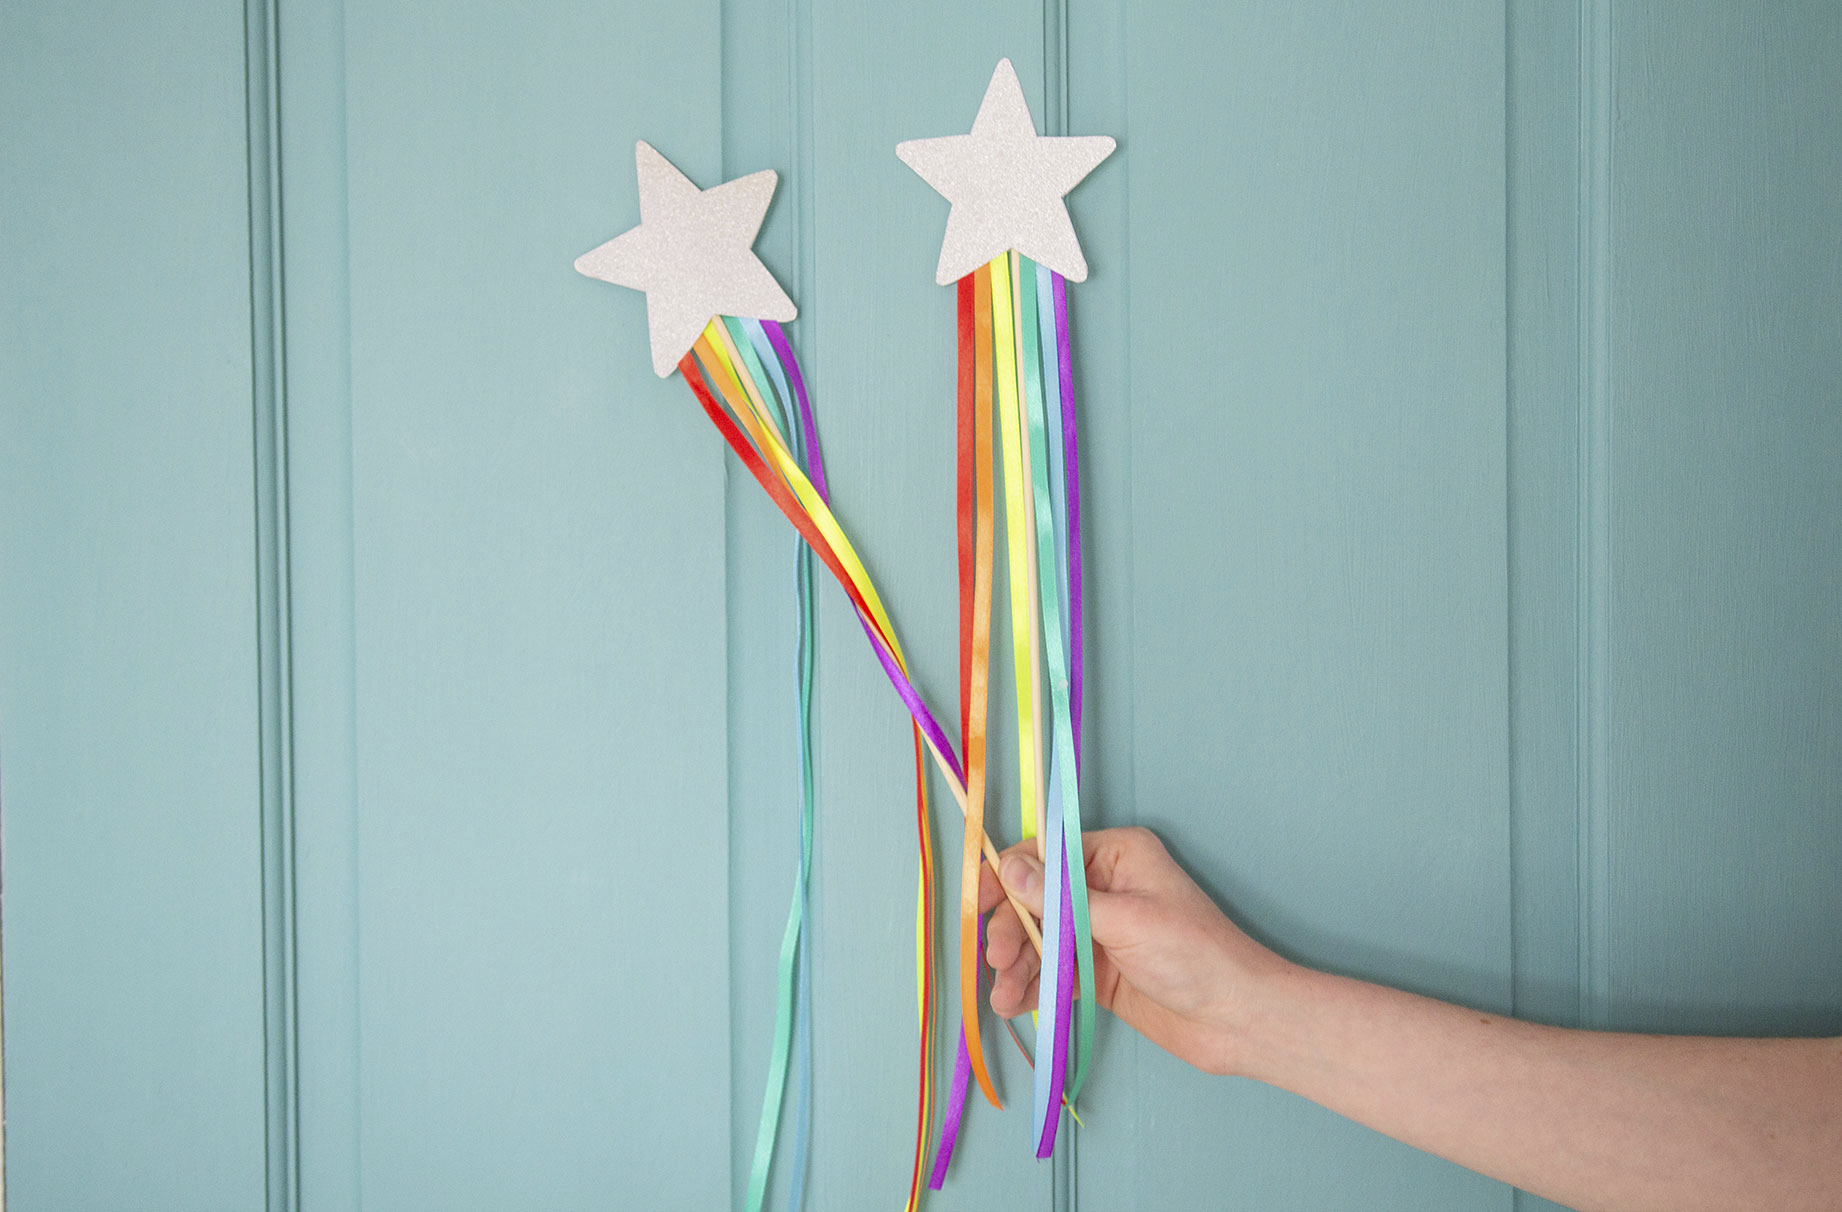 Easy crafts for kids illustrated by rainbow star wands